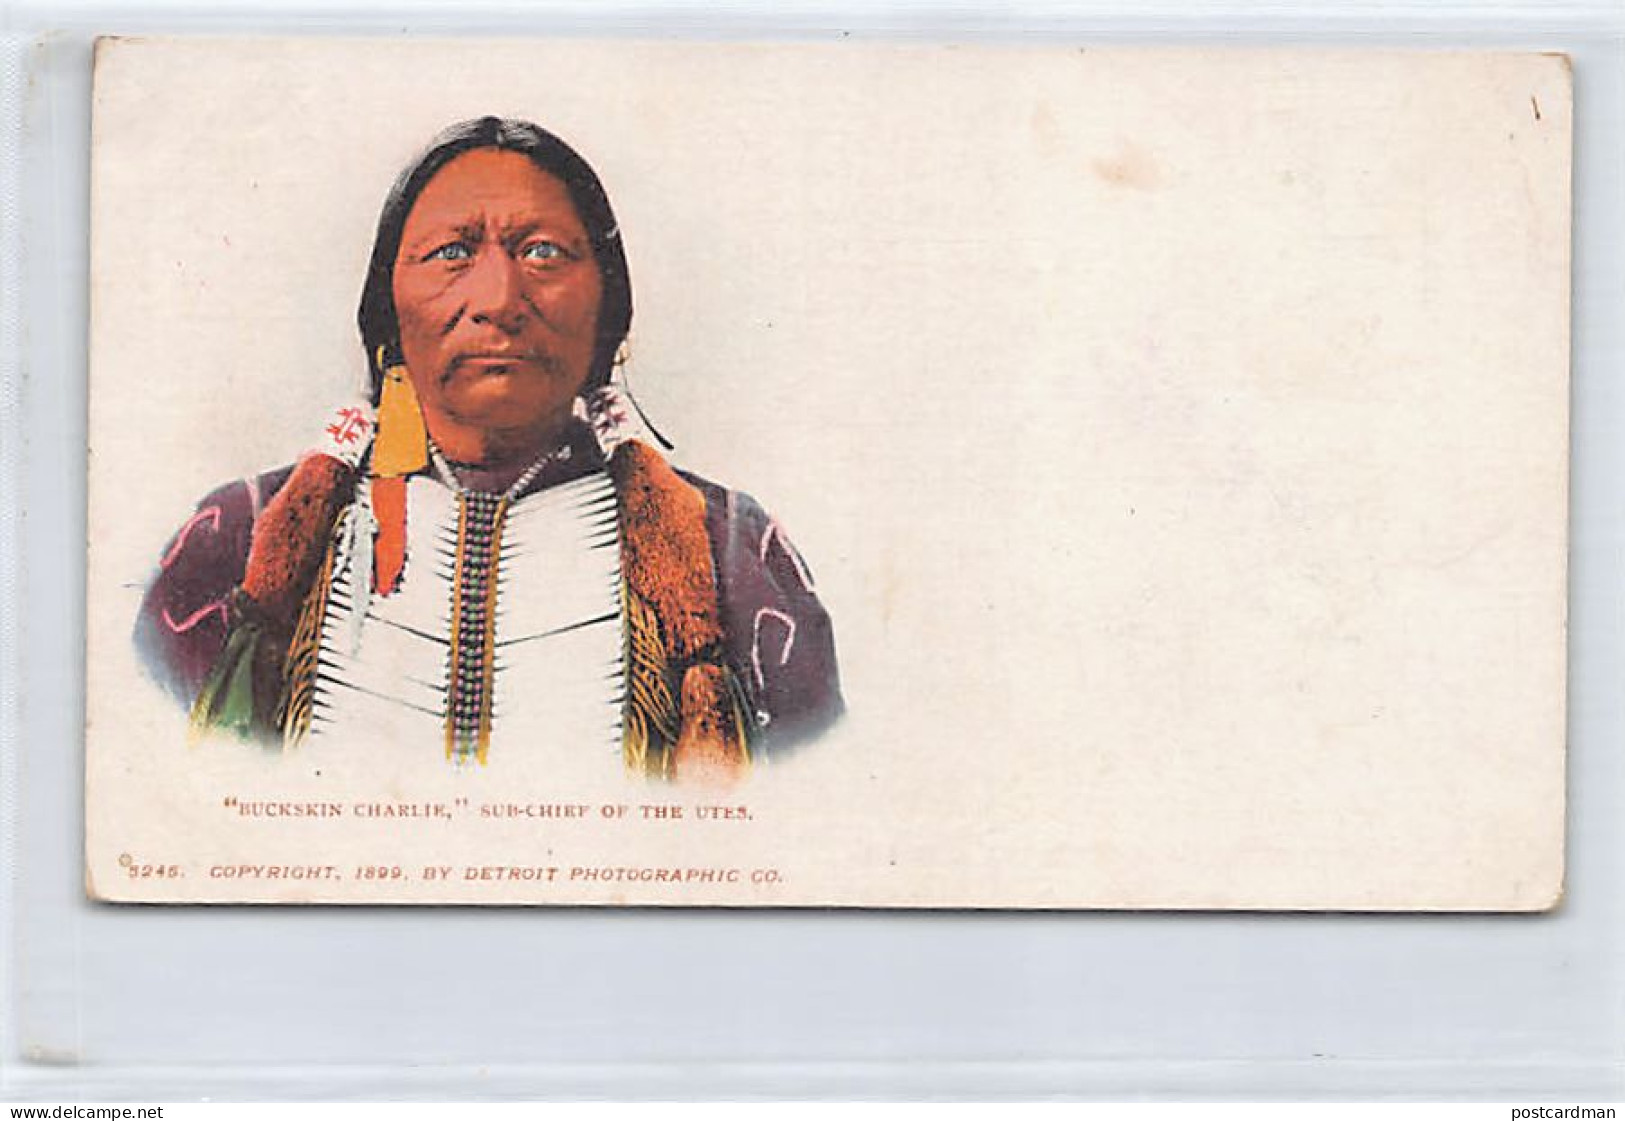 Usa - Native Americana - Buckskin Charlie, Sub-chief Of The Utes - Publ. Detroit Photographic Co. 5245 - Native Americans